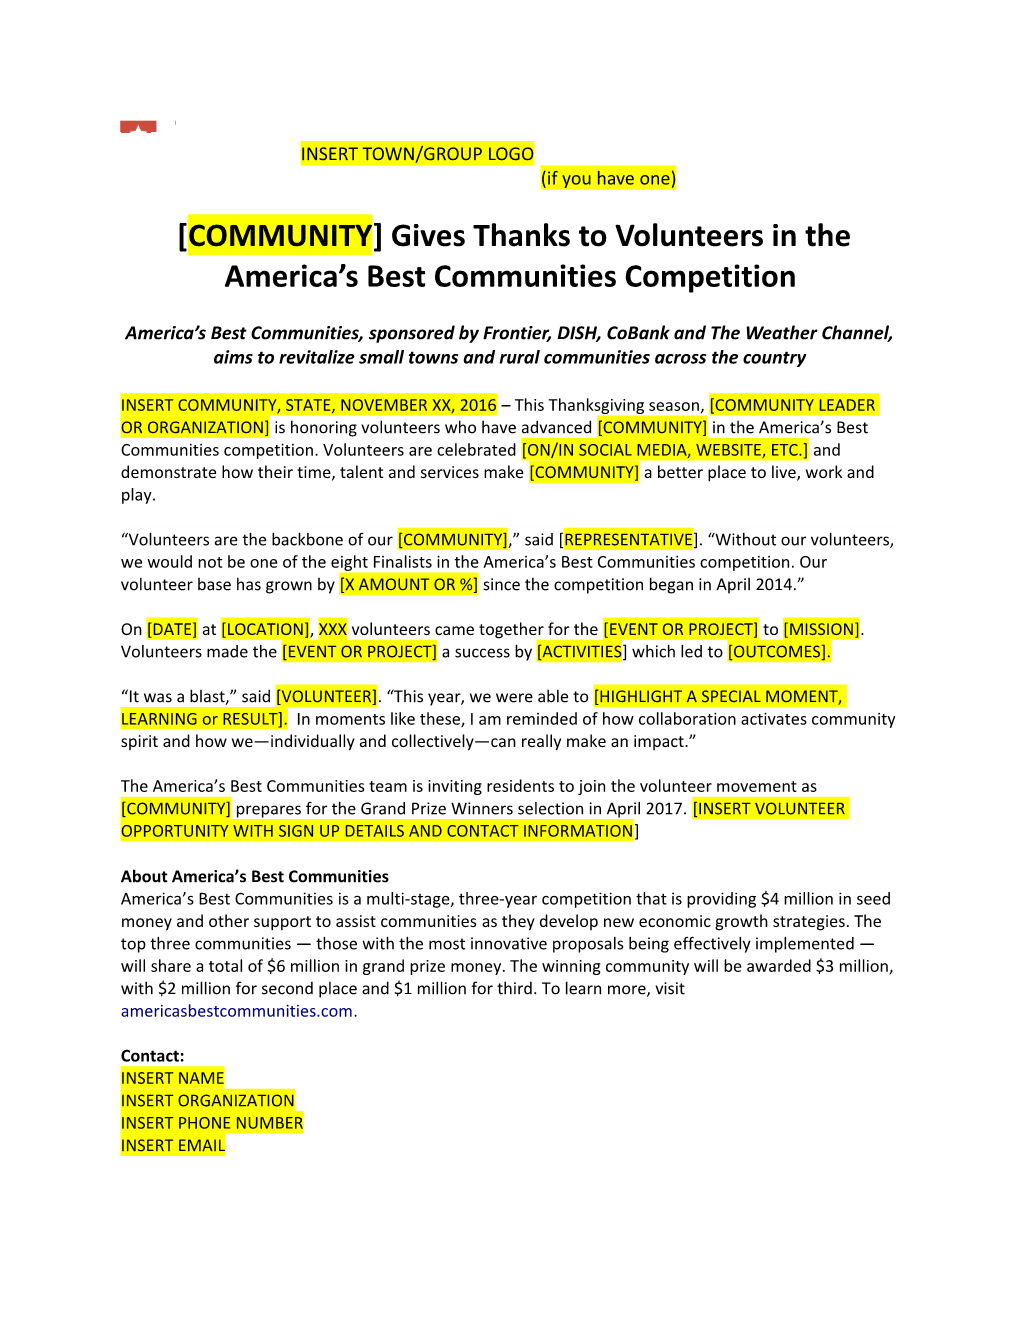 COMMUNITY Gives Thanks to Volunteers in the America S Best Communities Competition